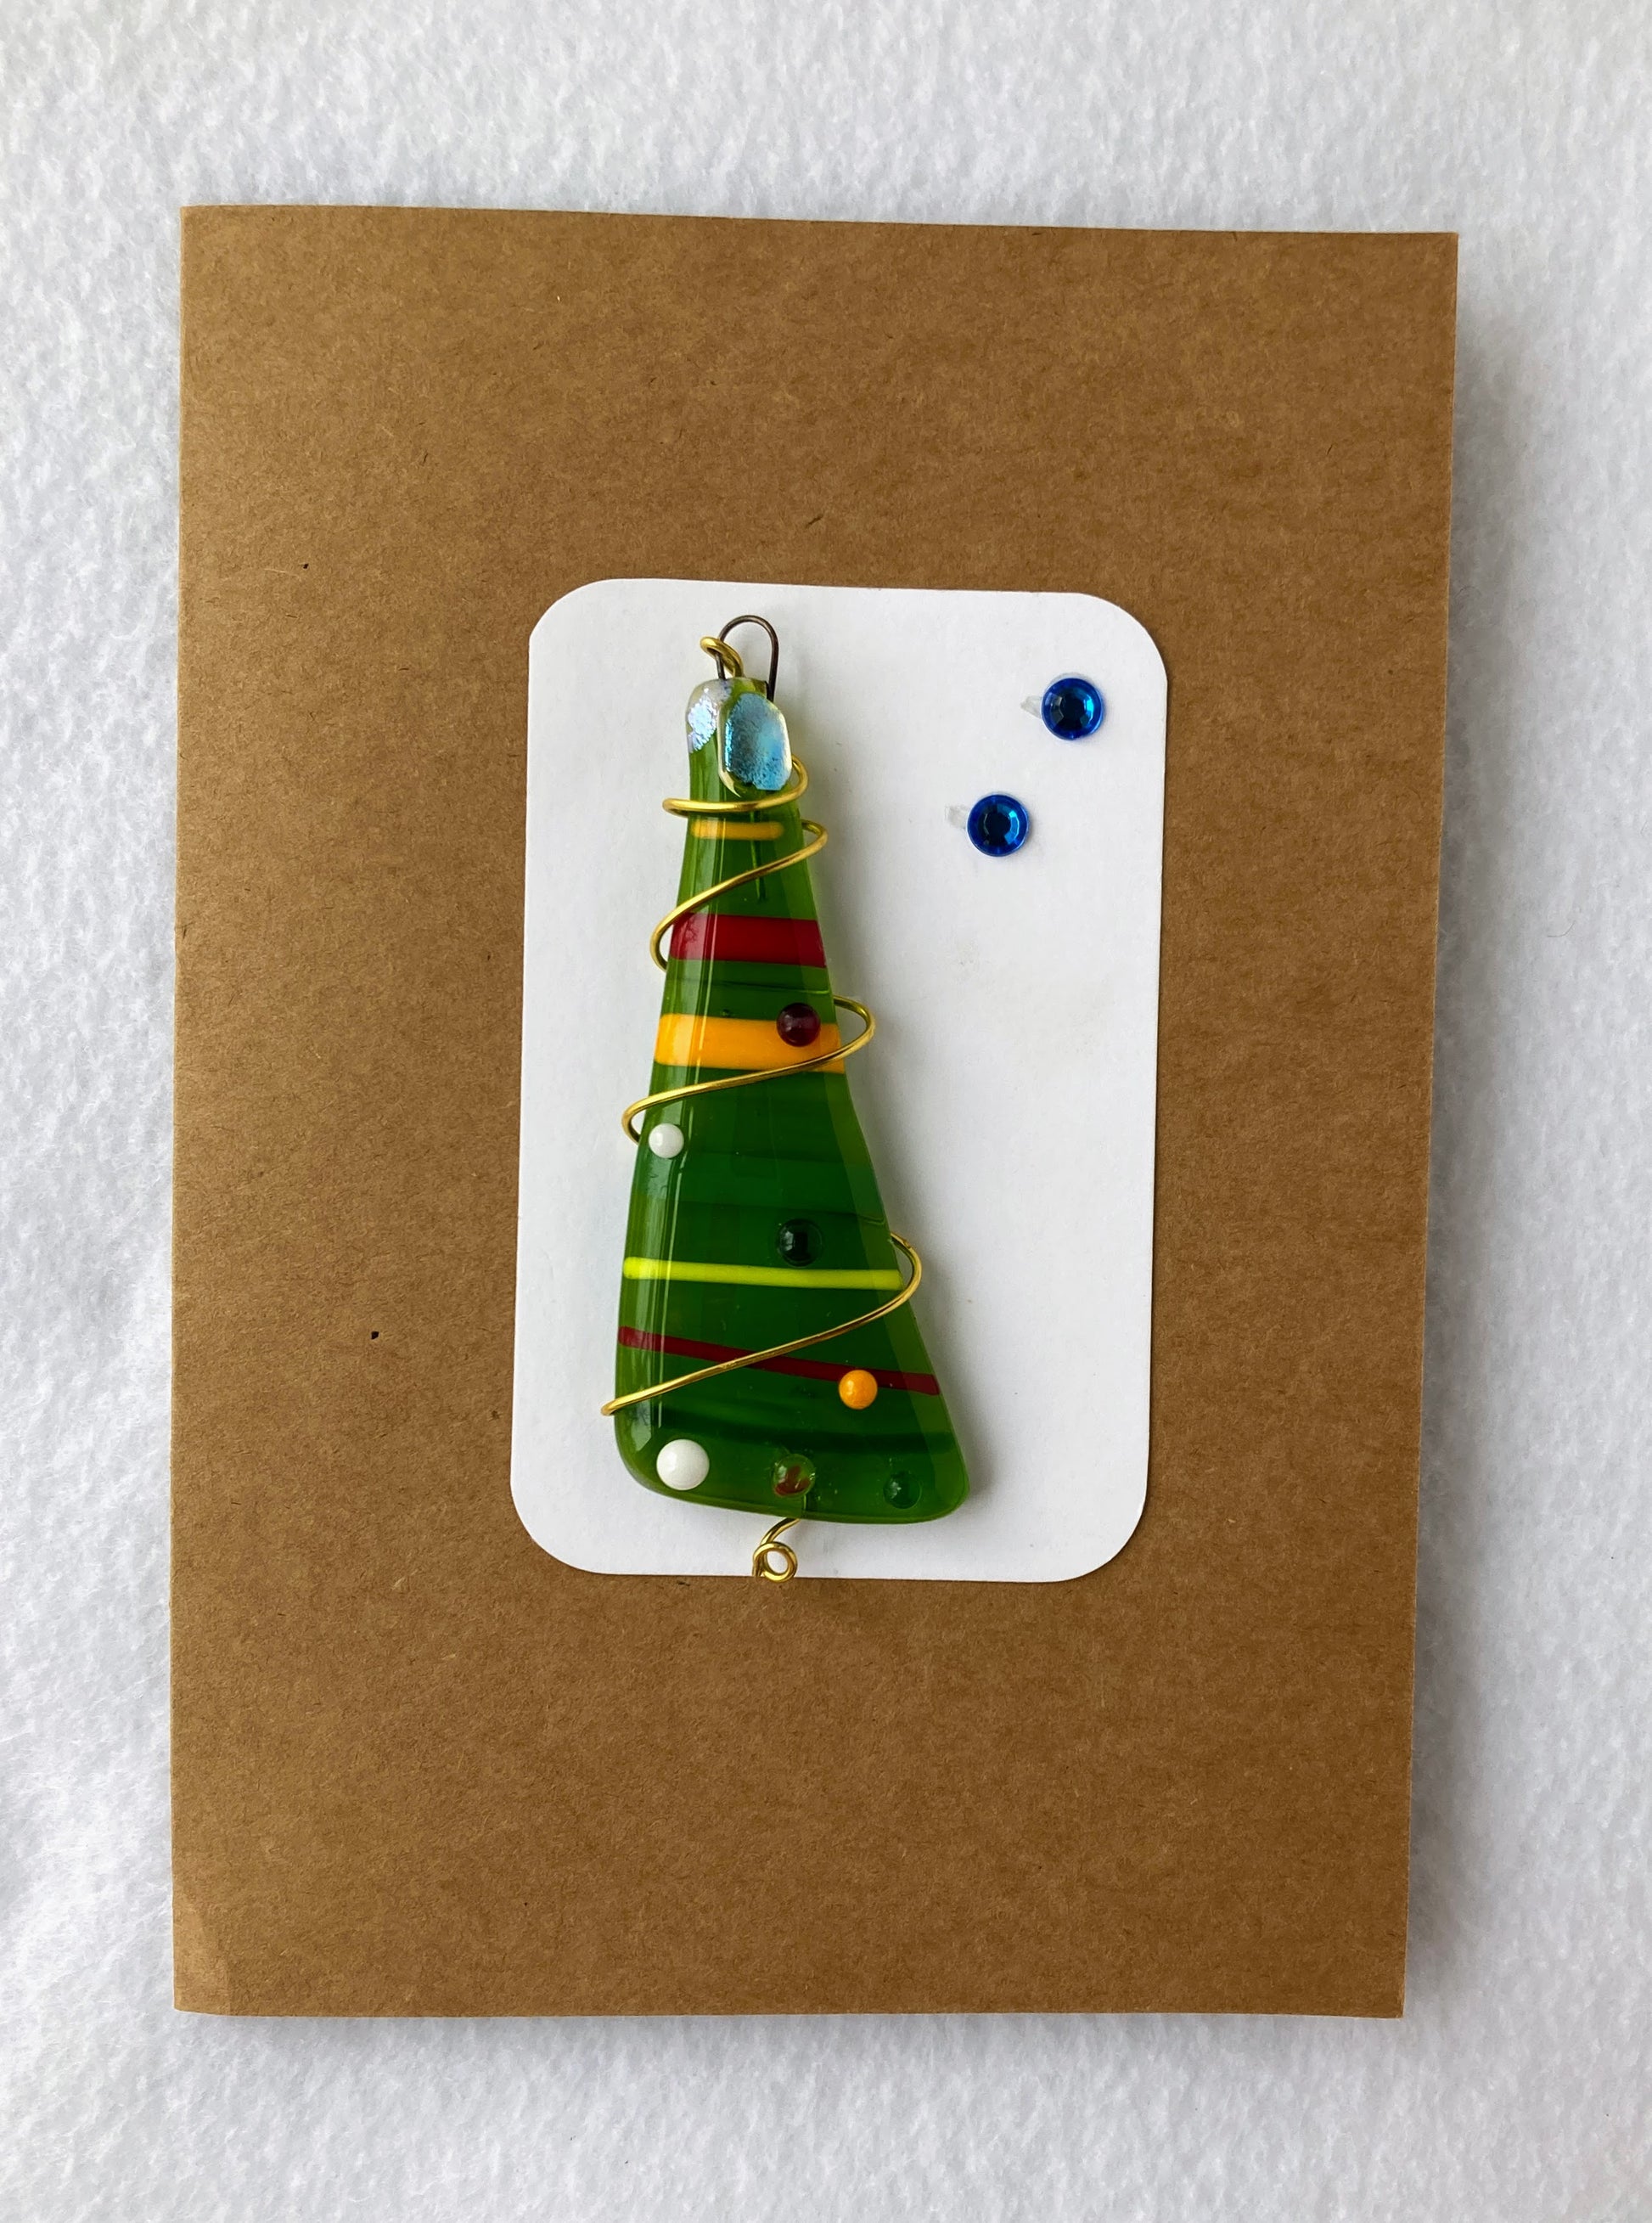 Fused Glass Ornament and card  Light green Christmas Tree with red, green and yellow stripes  Red wire wrapping gives the looks of festive tinsel   Small glass dot ornaments  Copper wire wraps around tree